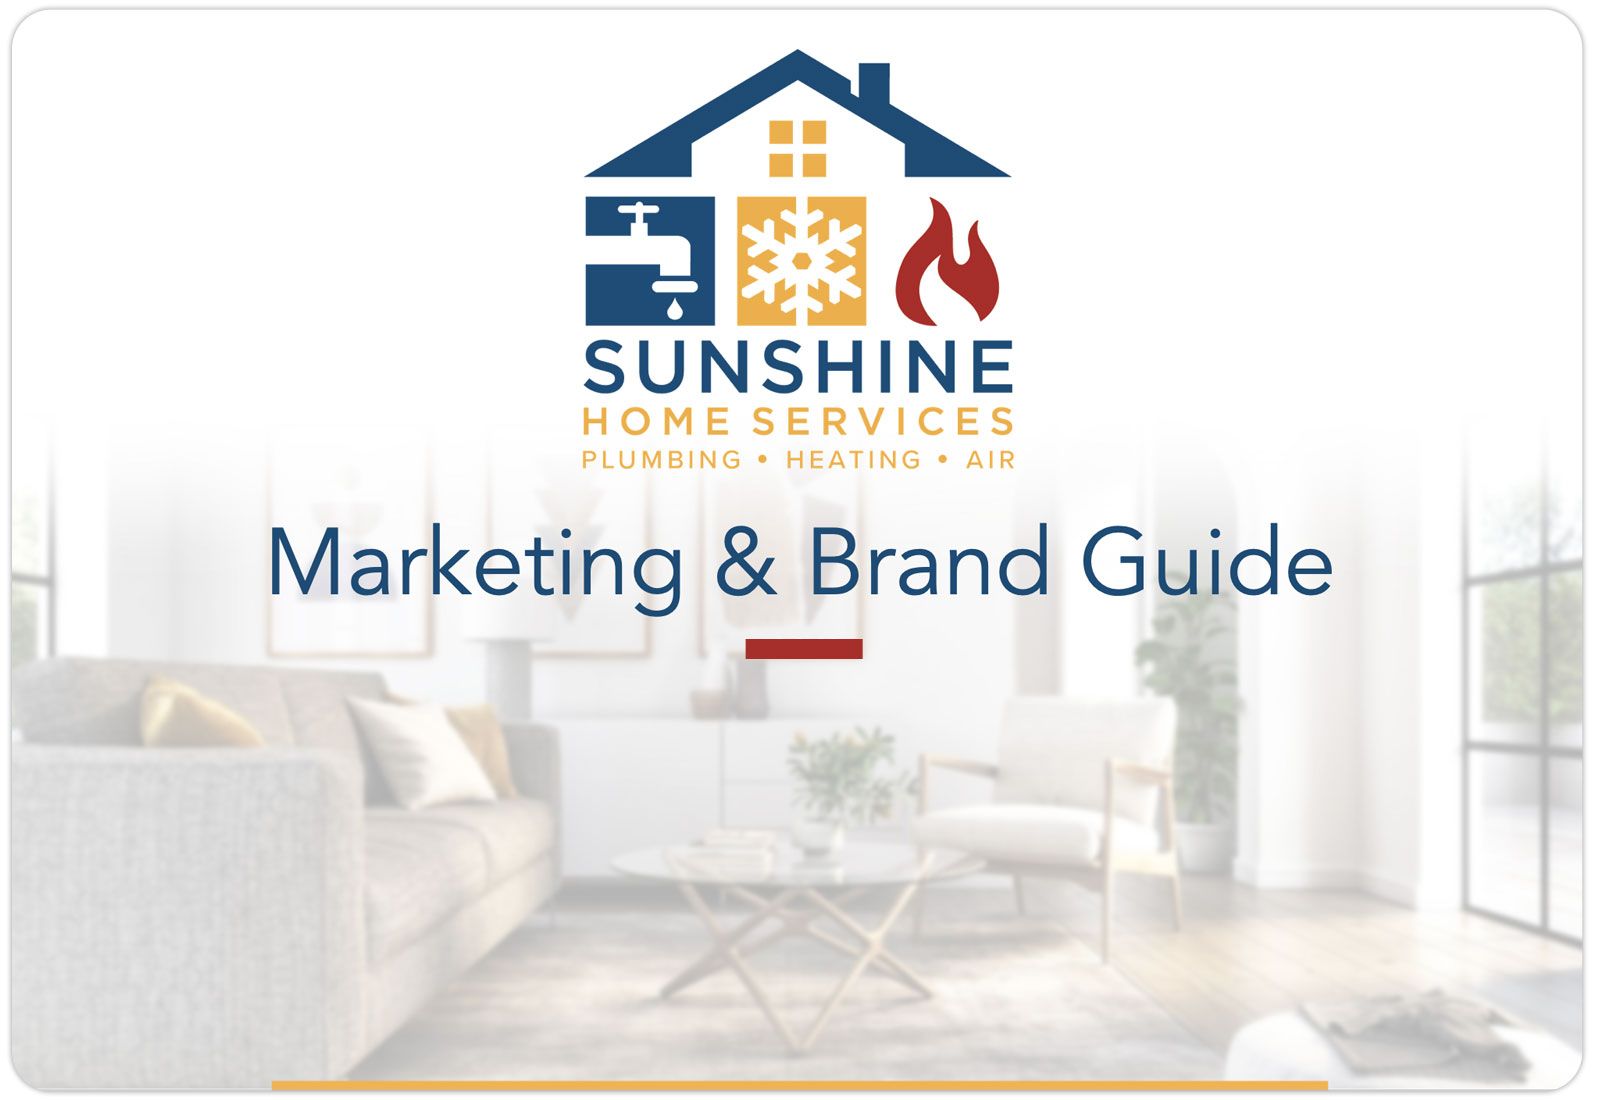 a marketing and brand guide for sunshine home services